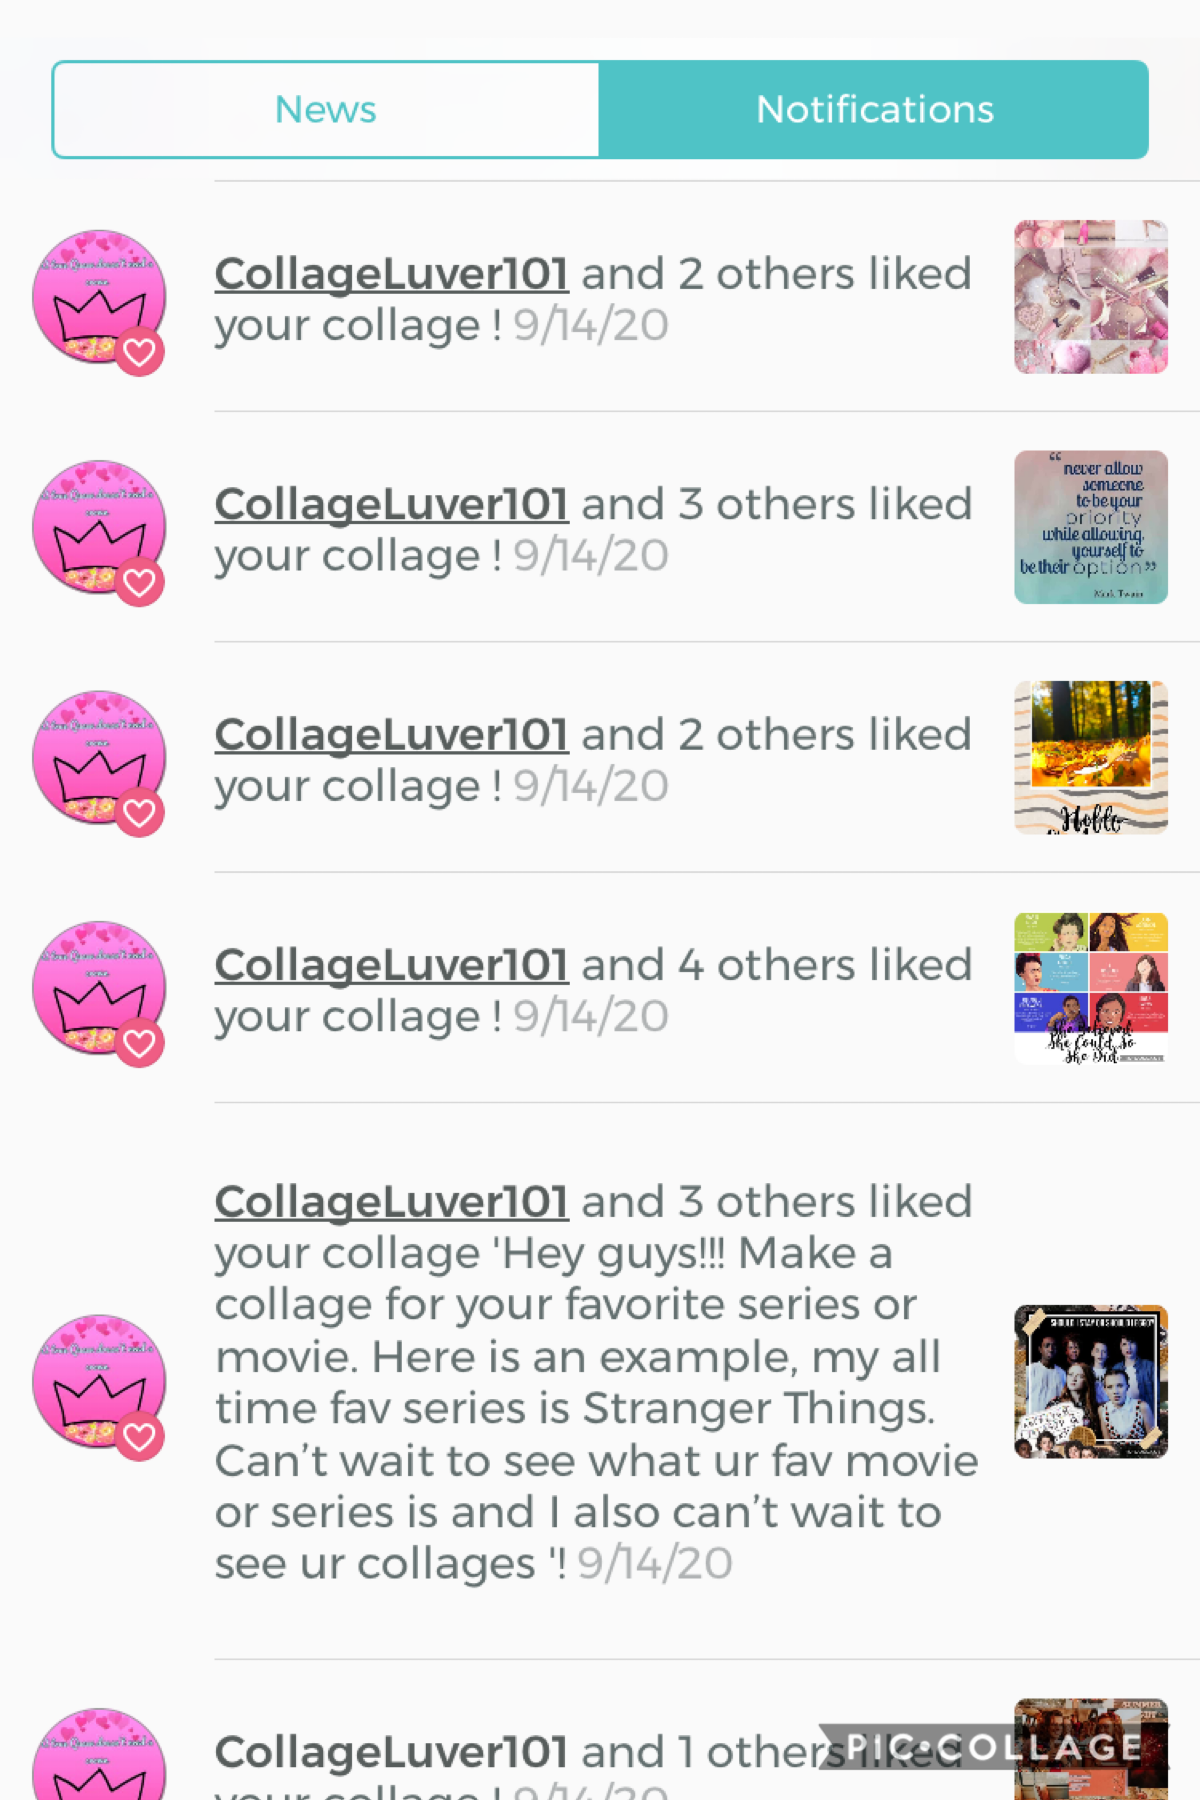 Shoutout to Collage Lover!